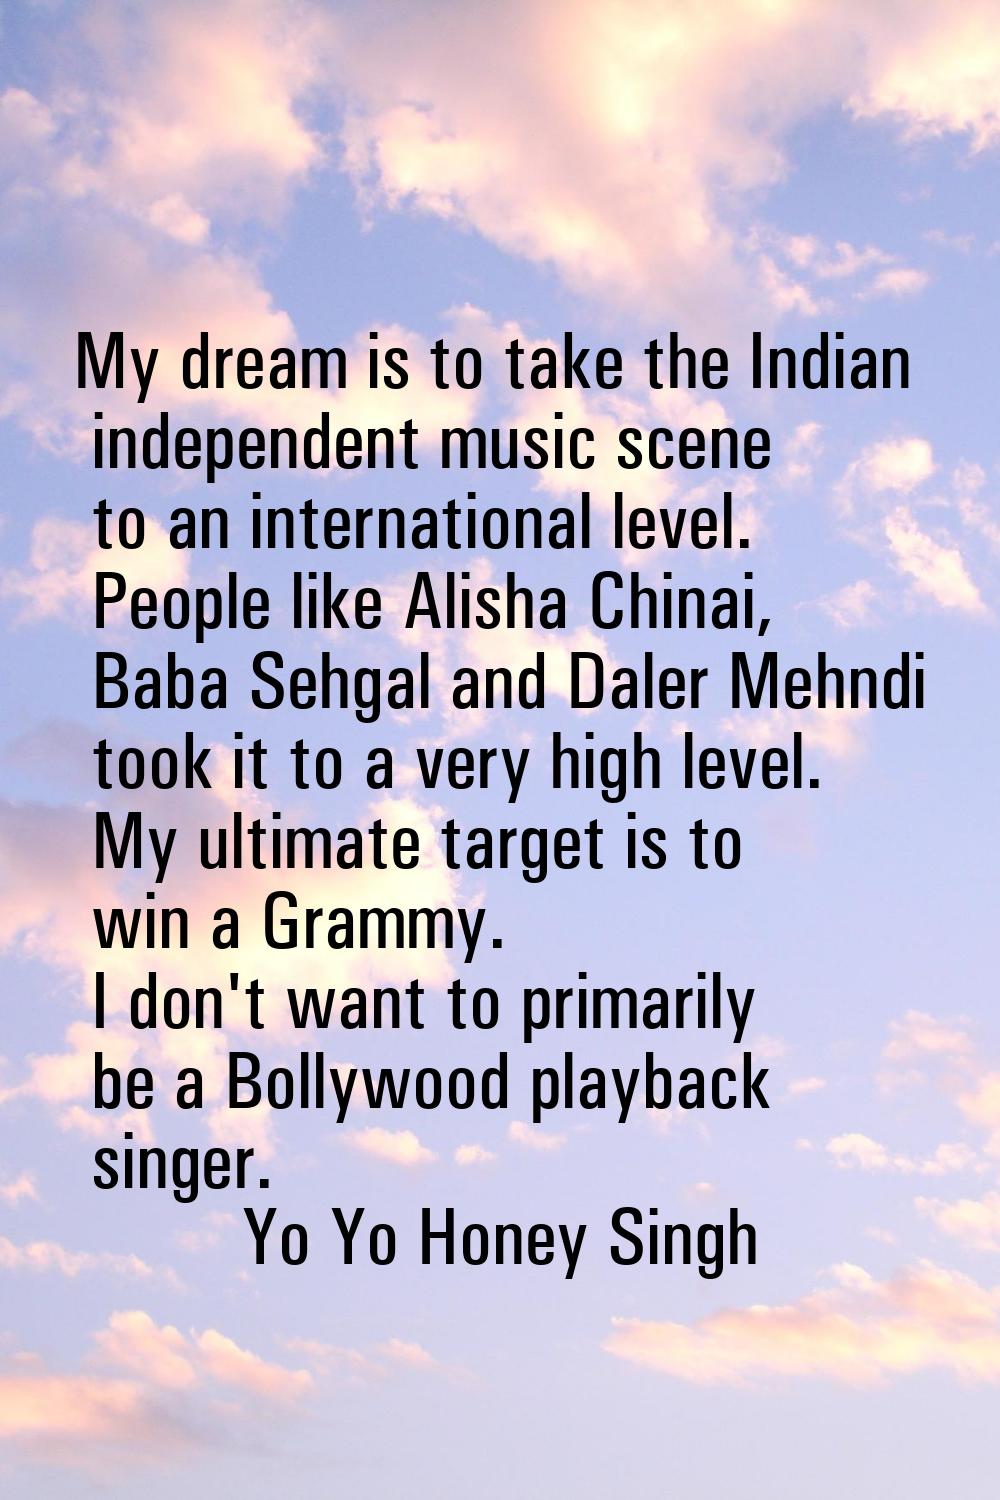 My dream is to take the Indian independent music scene to an international level. People like Alish